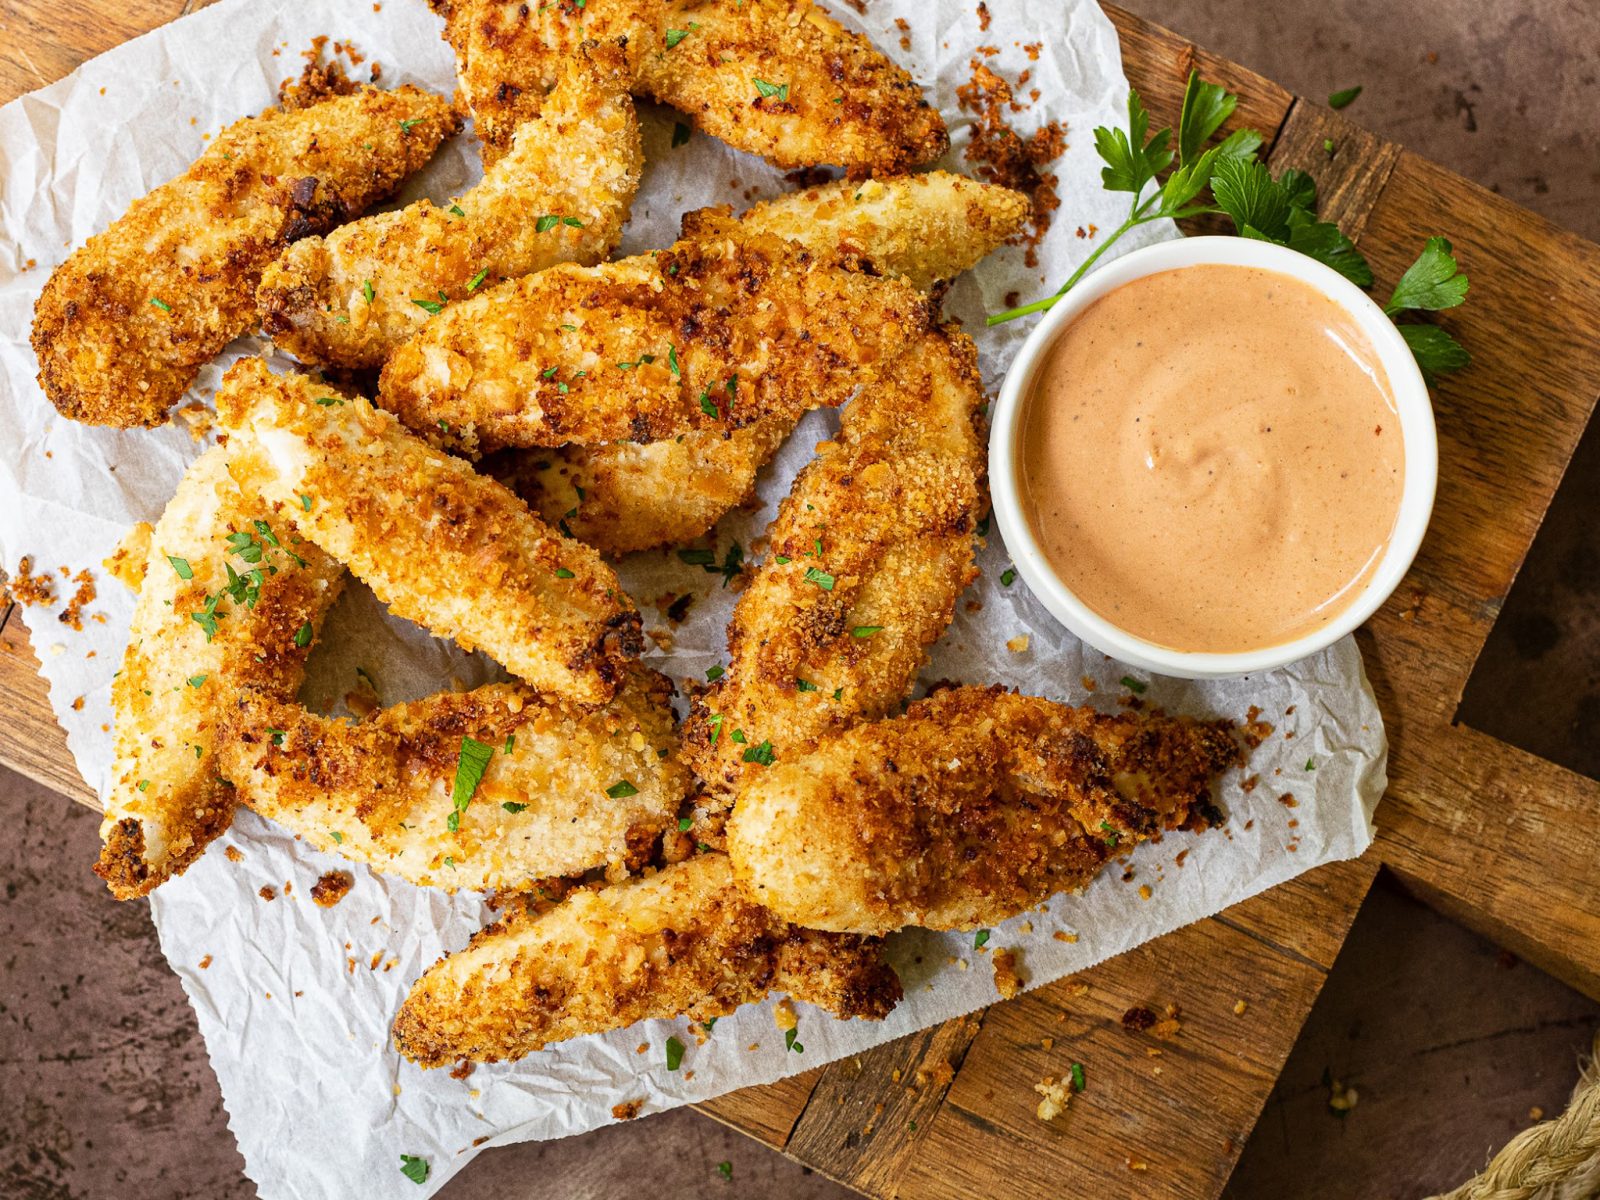 Serve Up Delicious Air-Fryer Chicken Tenders + Stock Your Pantry & Save At Publix!